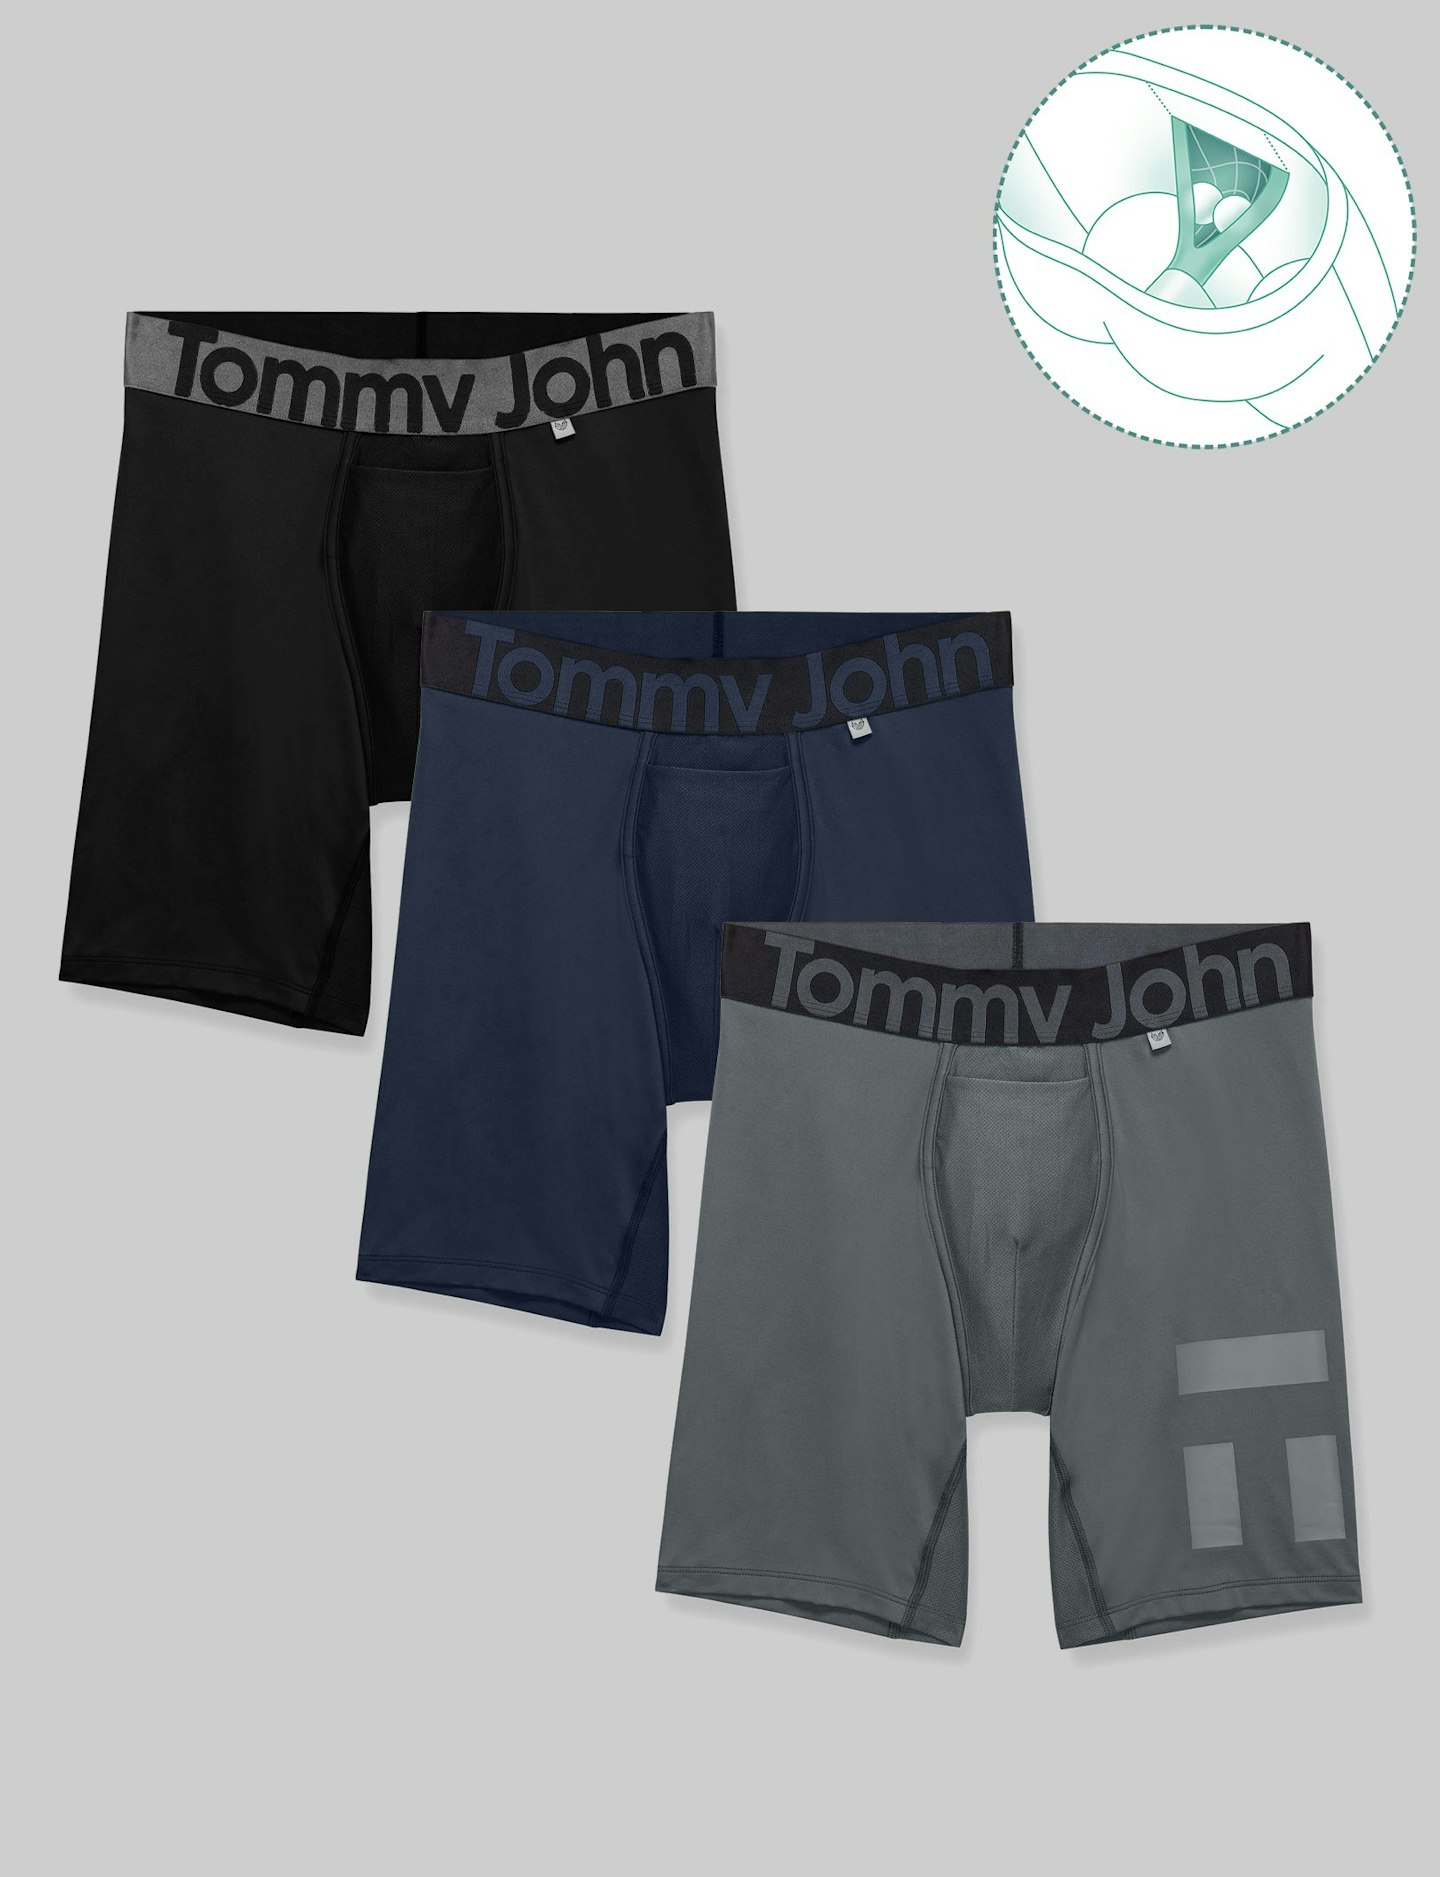 Just Dropped: 3 New Colors In Air Hammock Pouch - TommyJohn.com